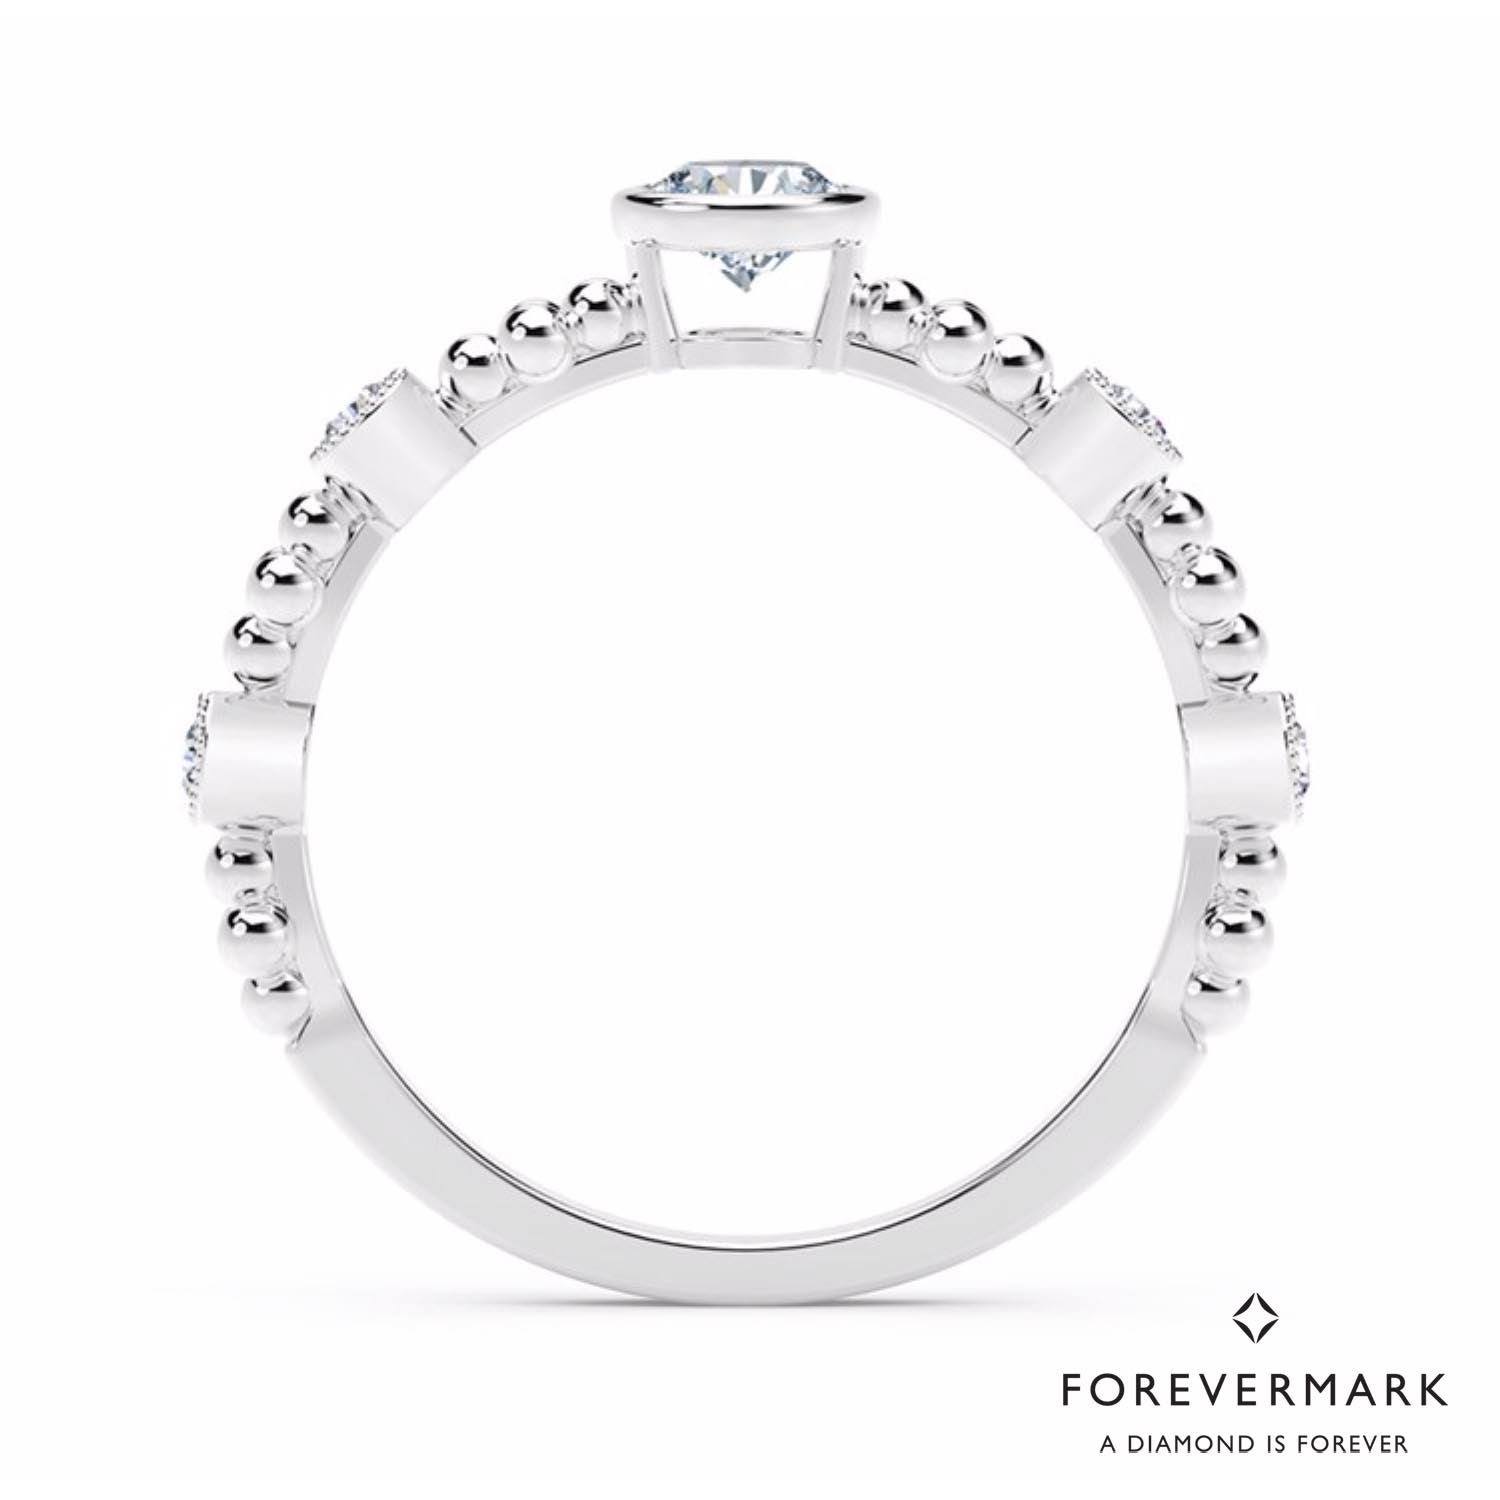 De Beers Forevermark Tribute Collection Diamond Ring in 18kt White Gold (3/8ct tw)